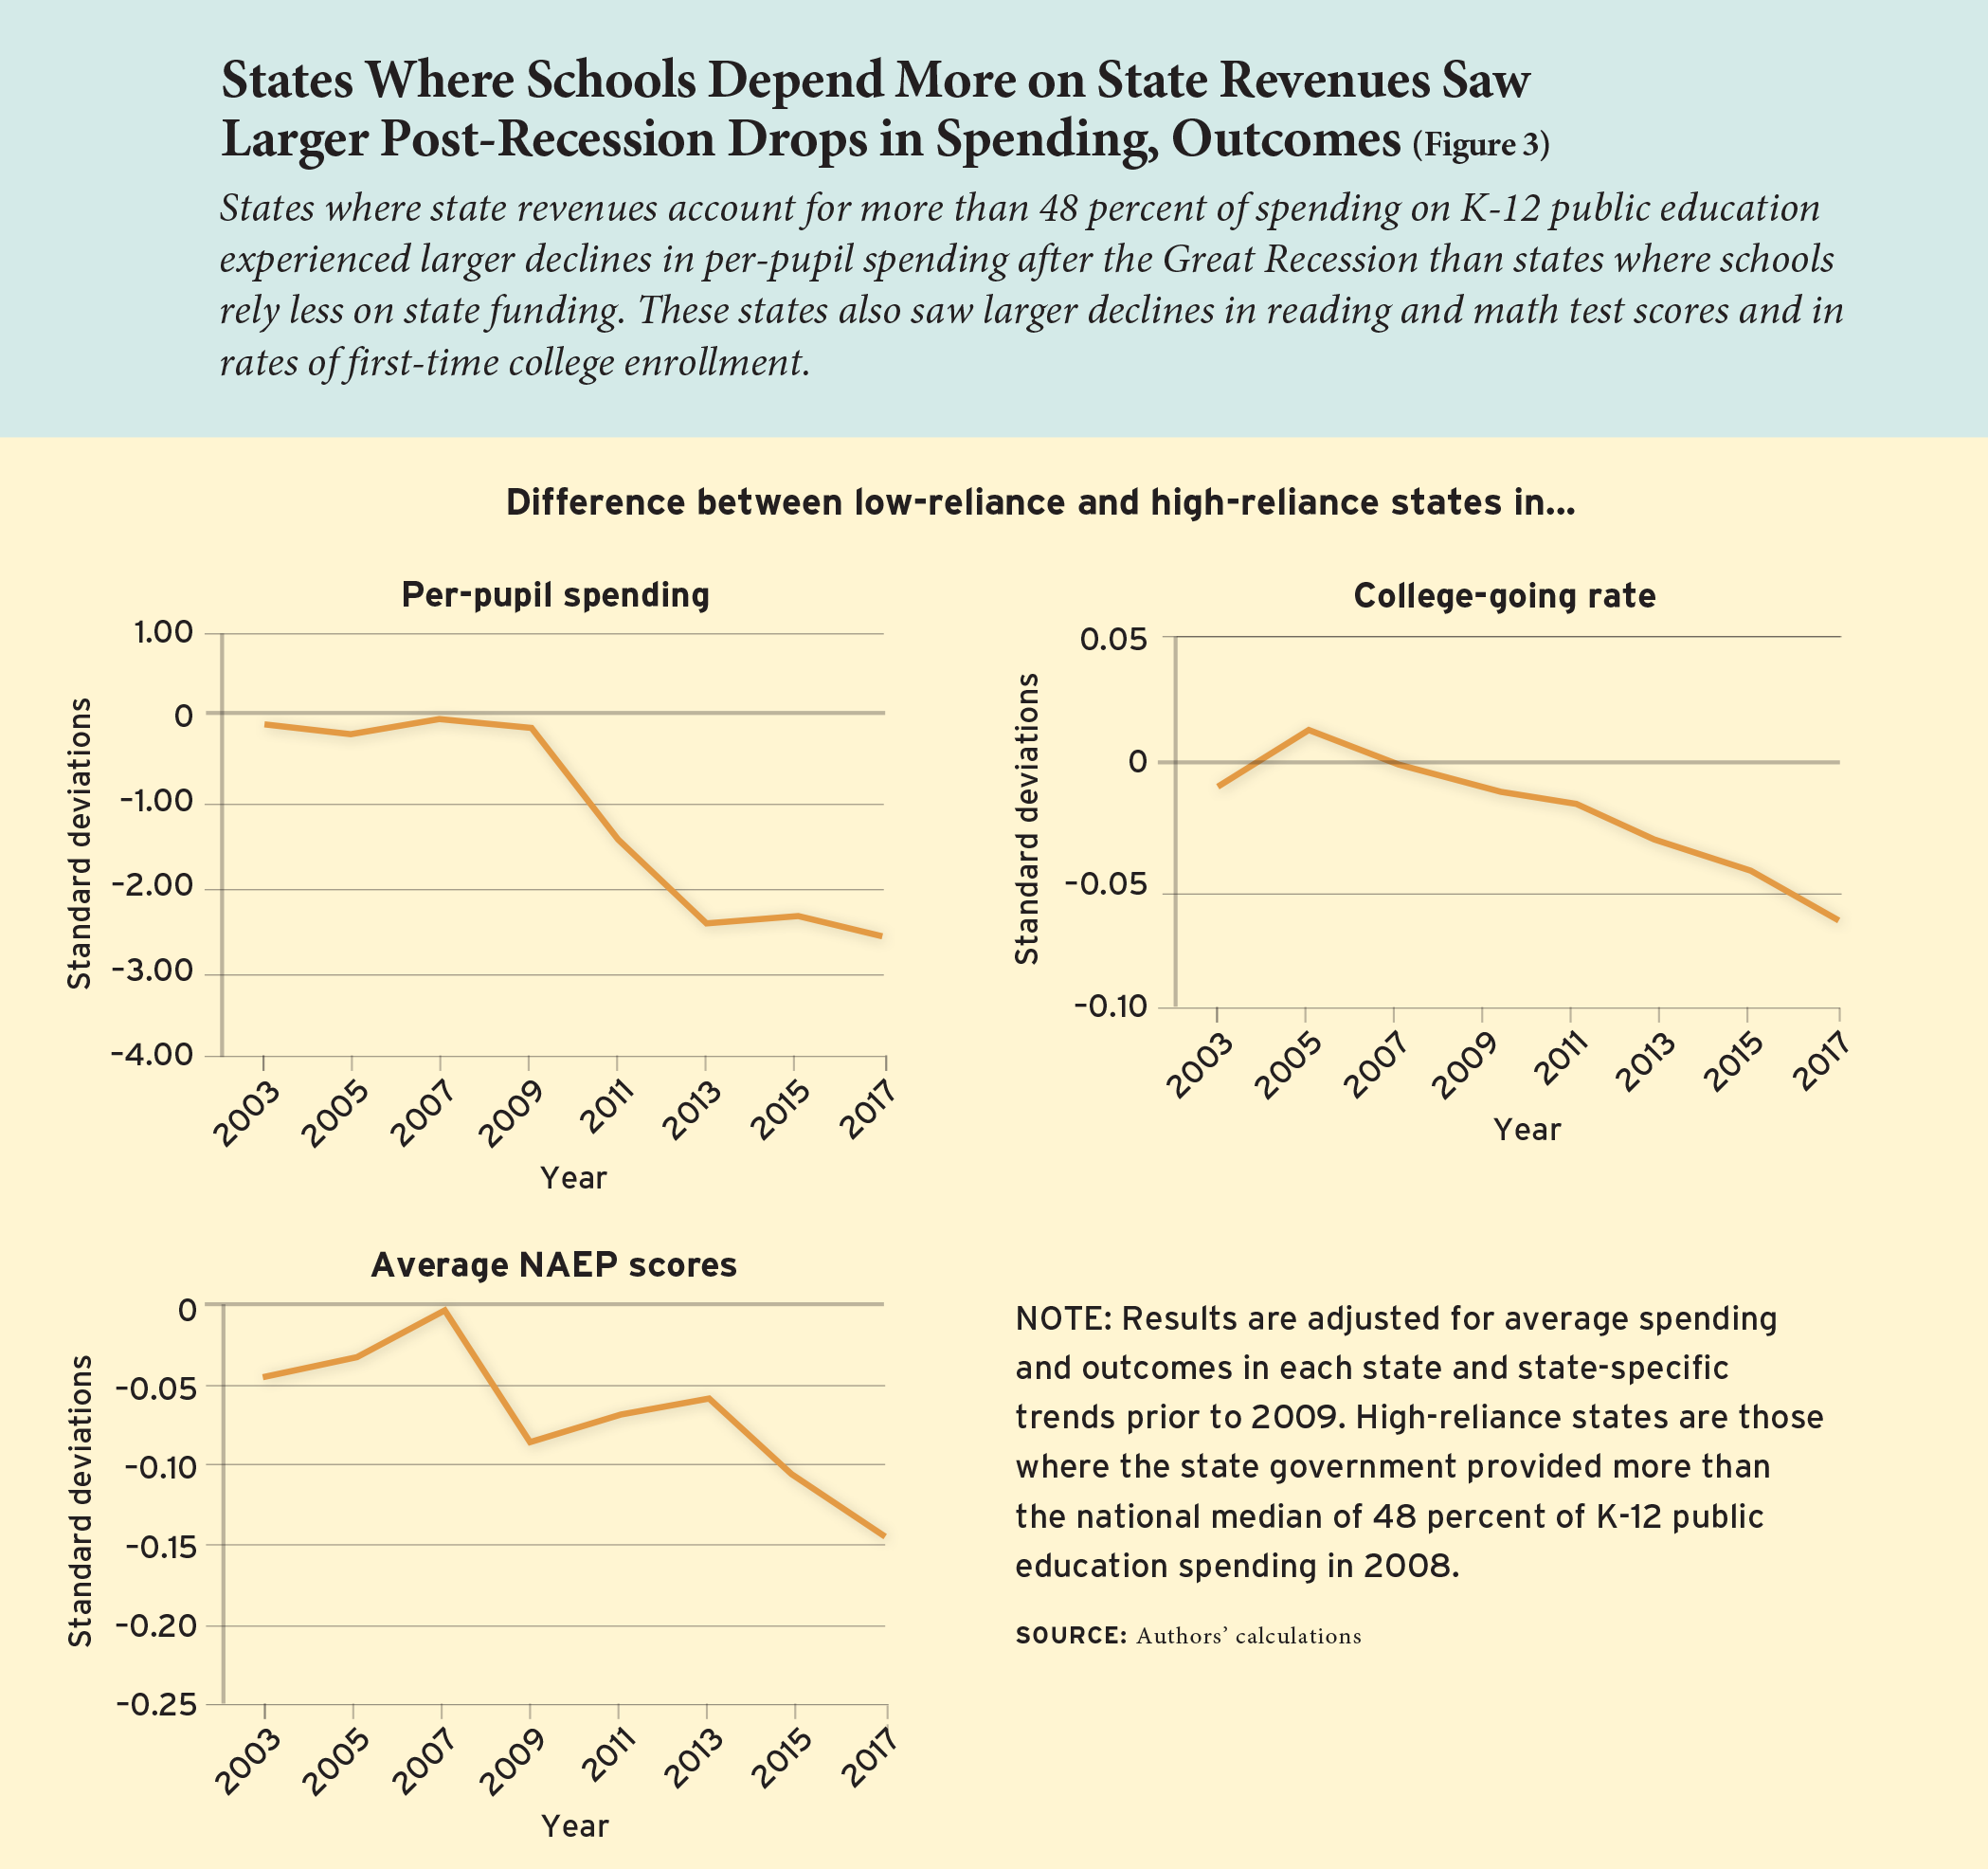 Figure 3: States Where Schools Depend More on State Revenues Saw Larger Post-Recession Drops in Spending, Outcomes